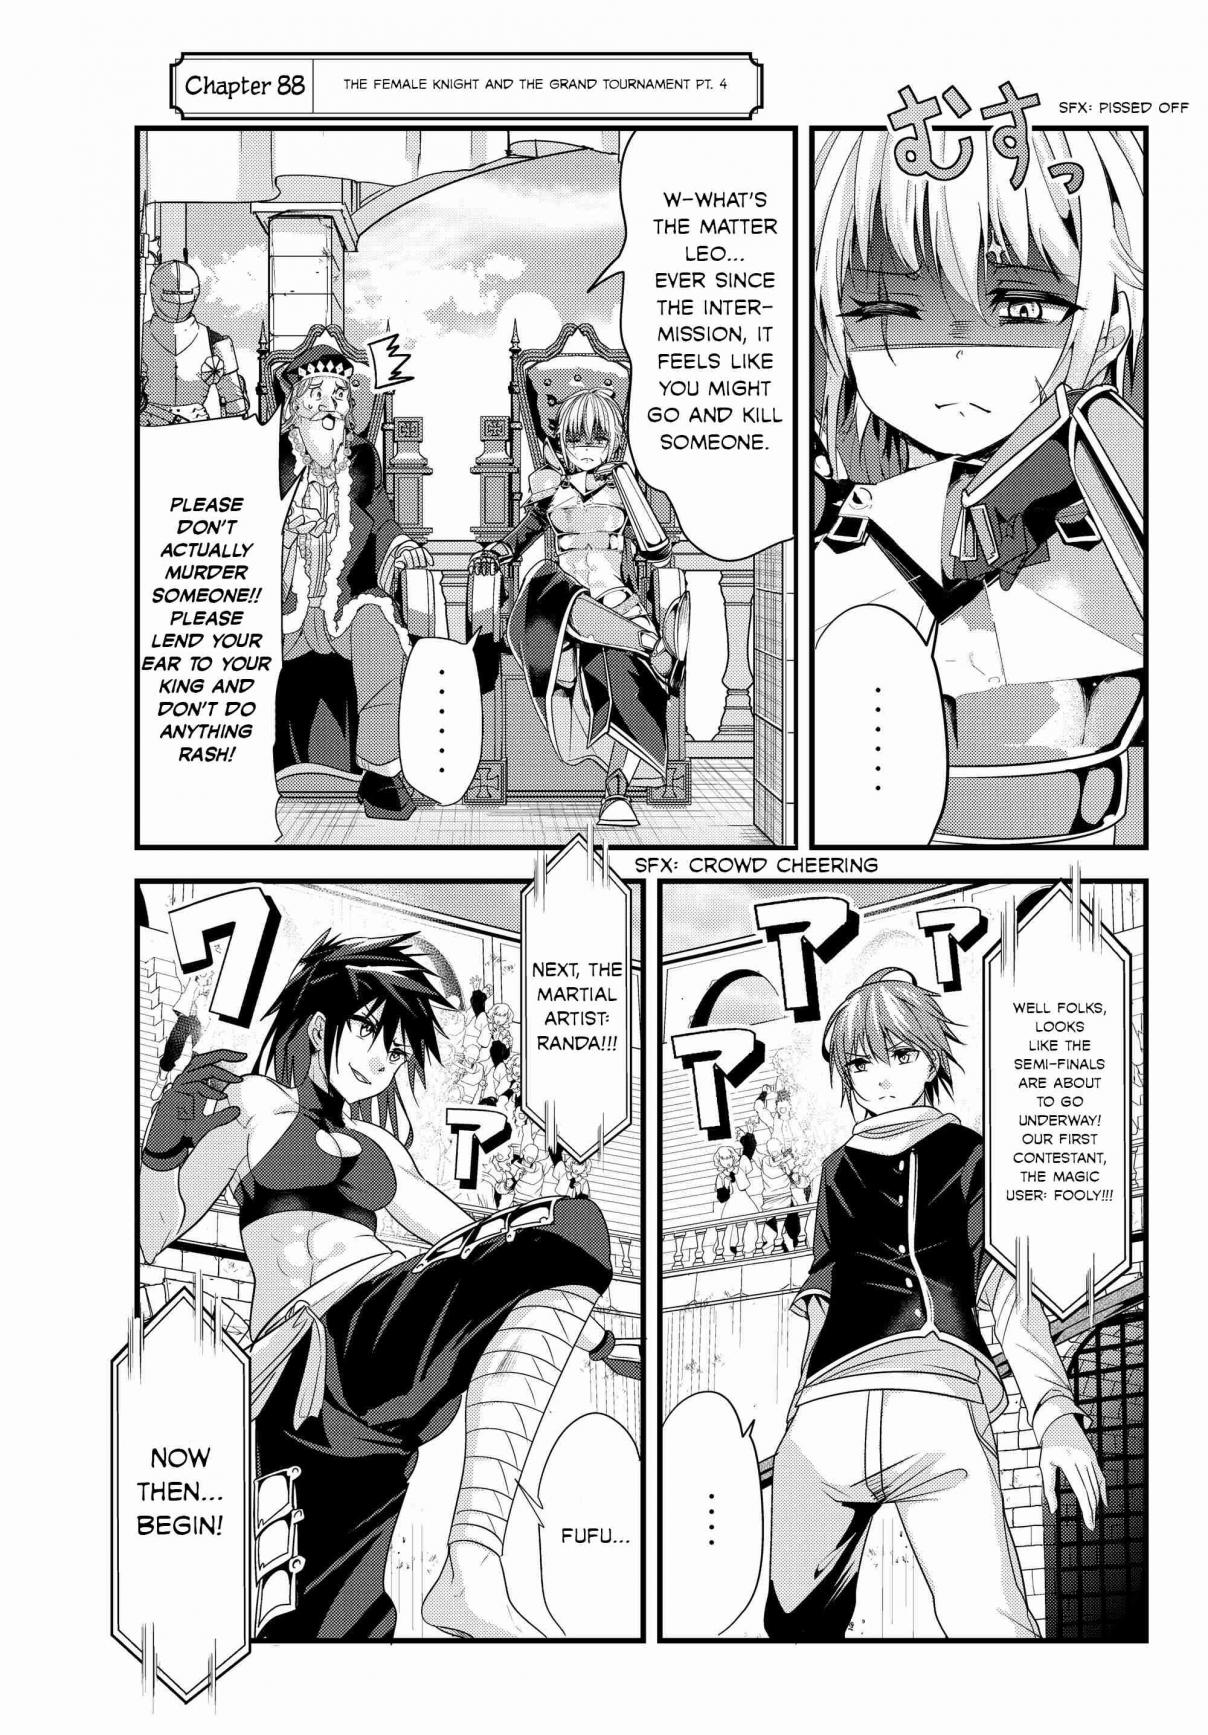 A Story About Treating a Female Knight, Who Has Never Been Treated as a Woman, as a Woman Ch. 88 The Female Knight and the Grand Tournament Pt.4